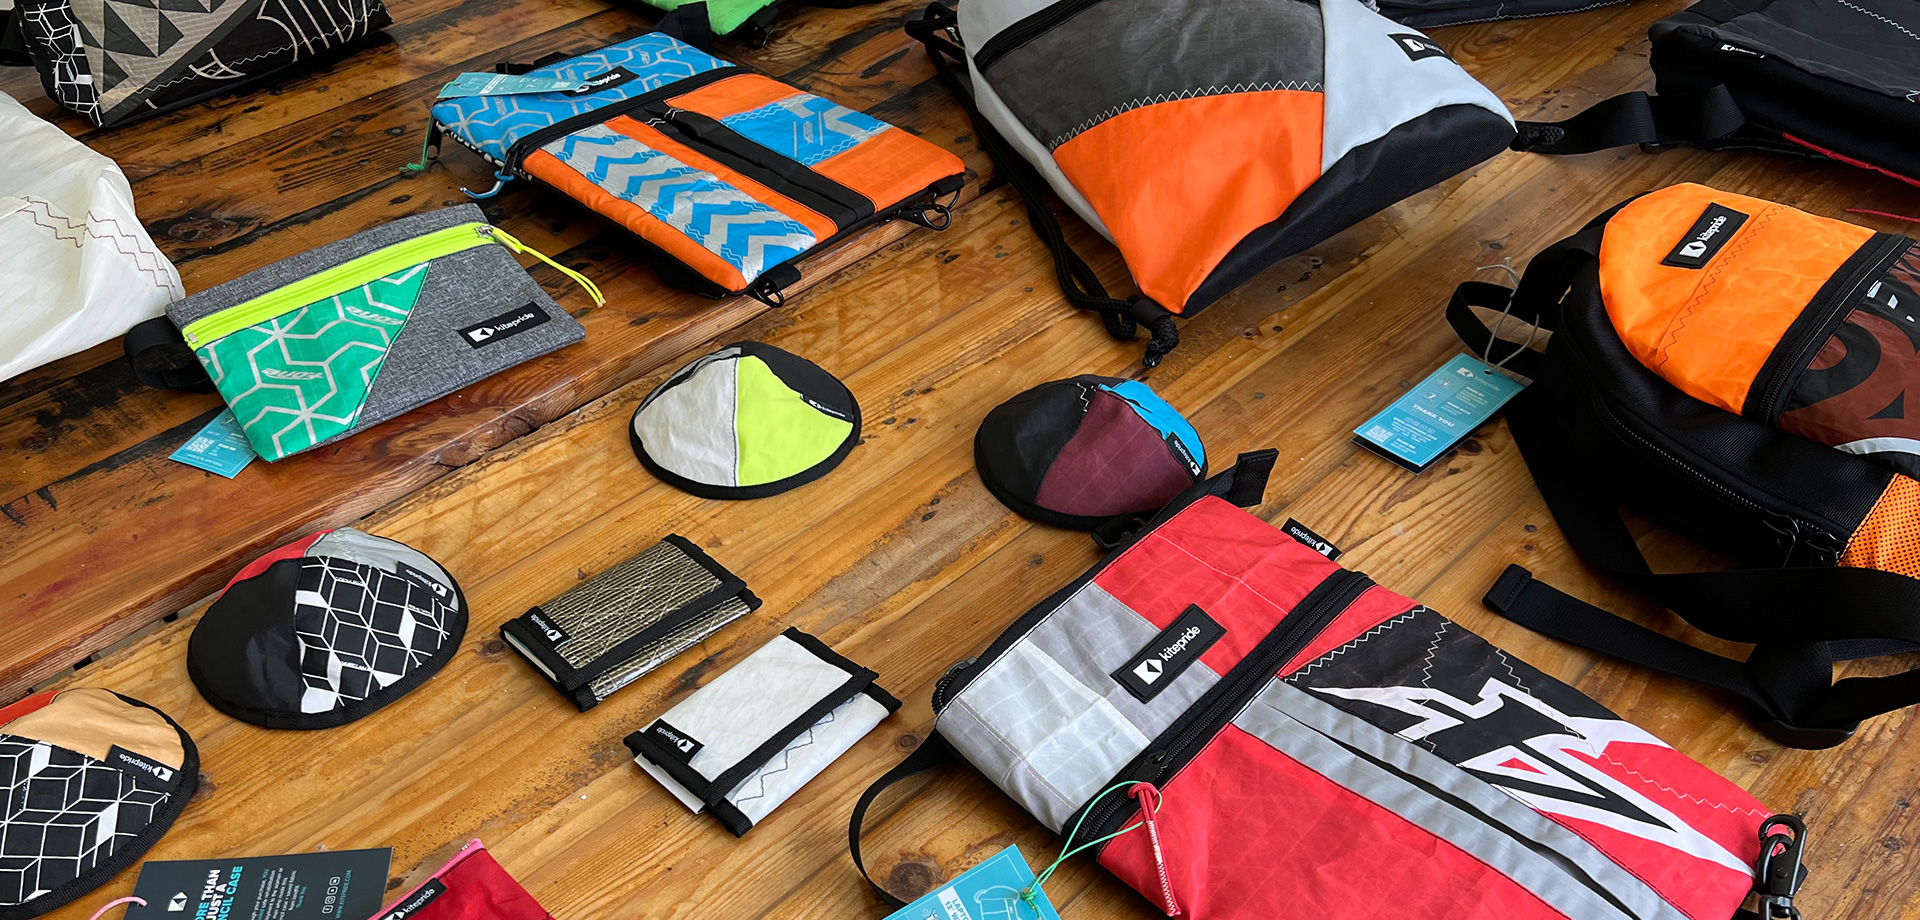 Kitepride sustainable bags and social business